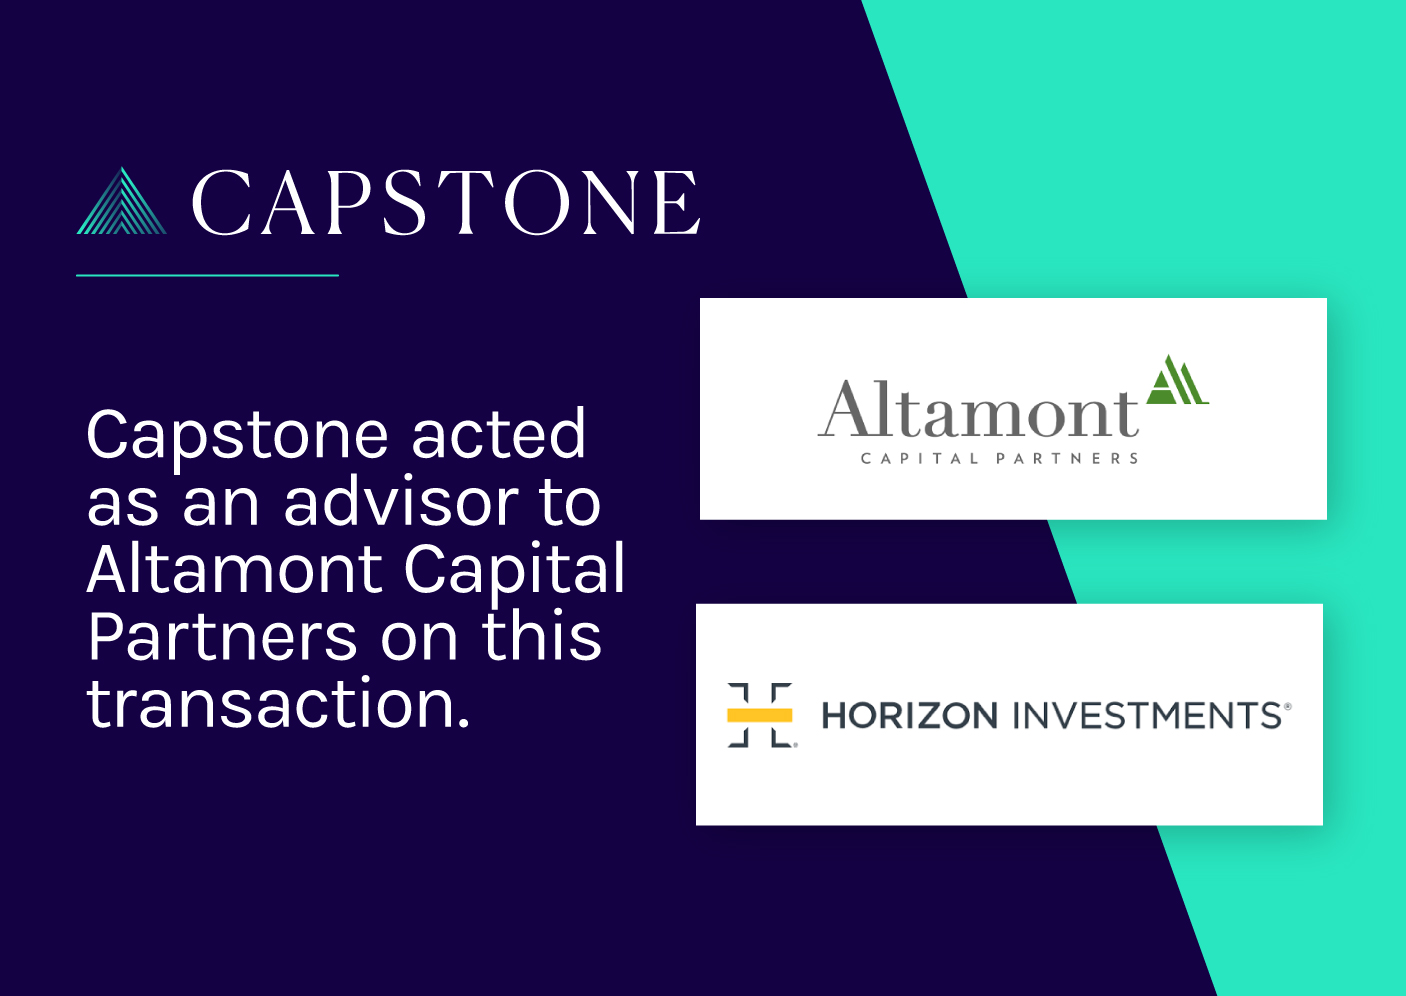 Altamont Capital Partners Invests in Horizon Investments